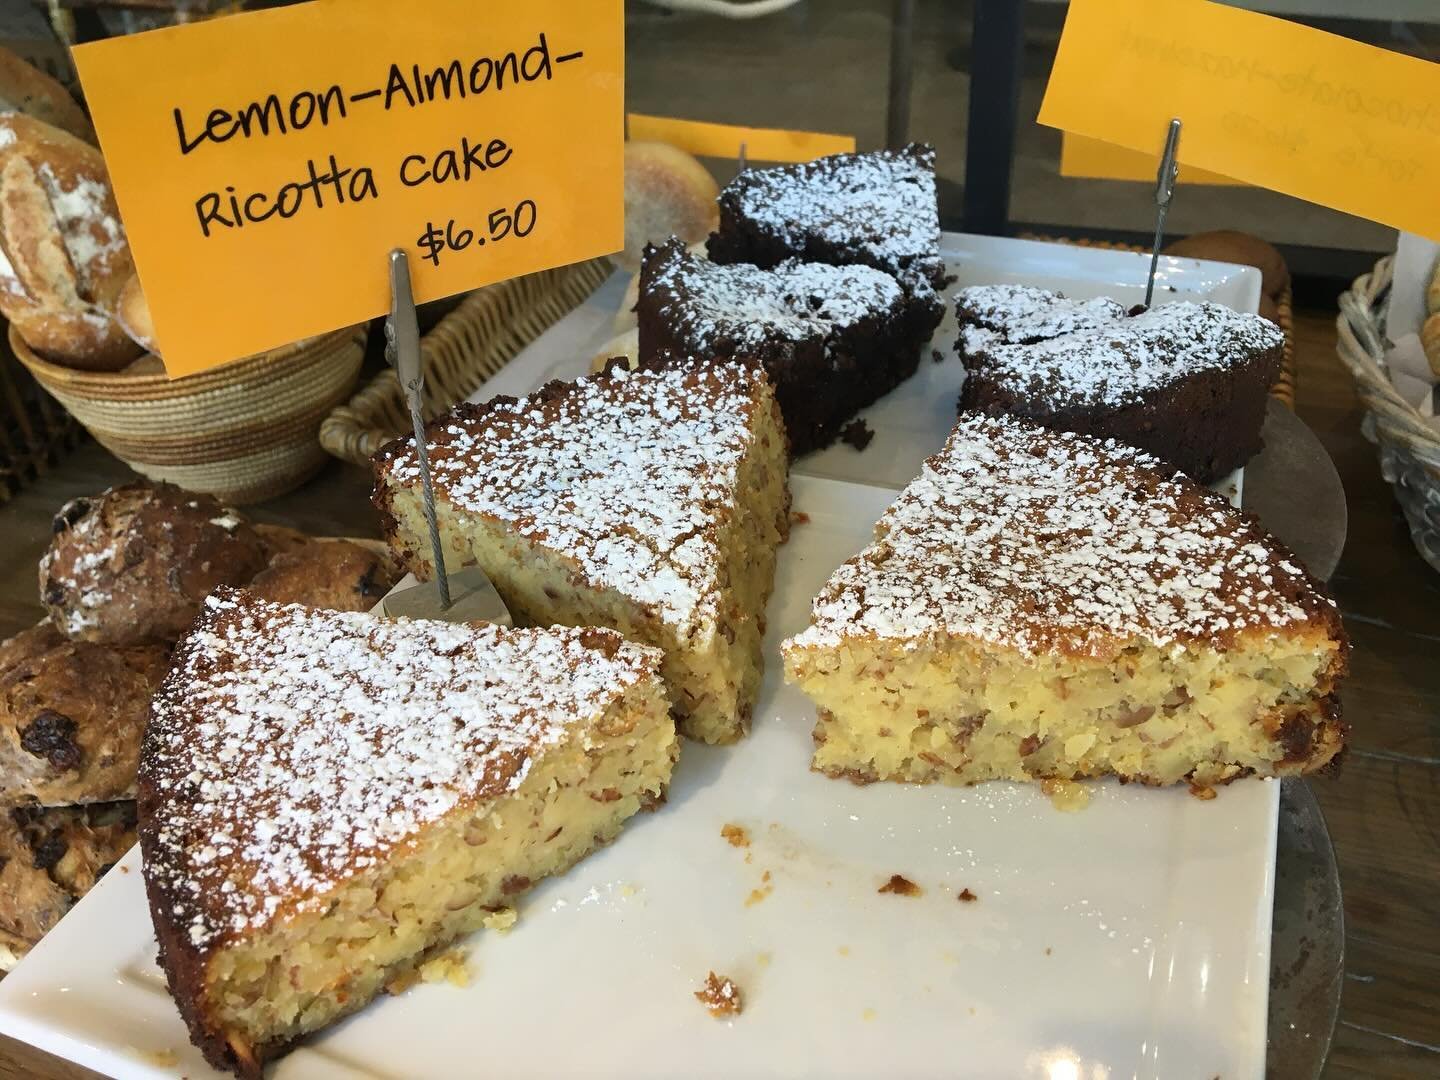 It&rsquo;s springtime in Santa Fe...the days are warmer; lilacs are in bloom, and our lemon-ricotta-almond cake is back on the menu!
#SageBakehouse